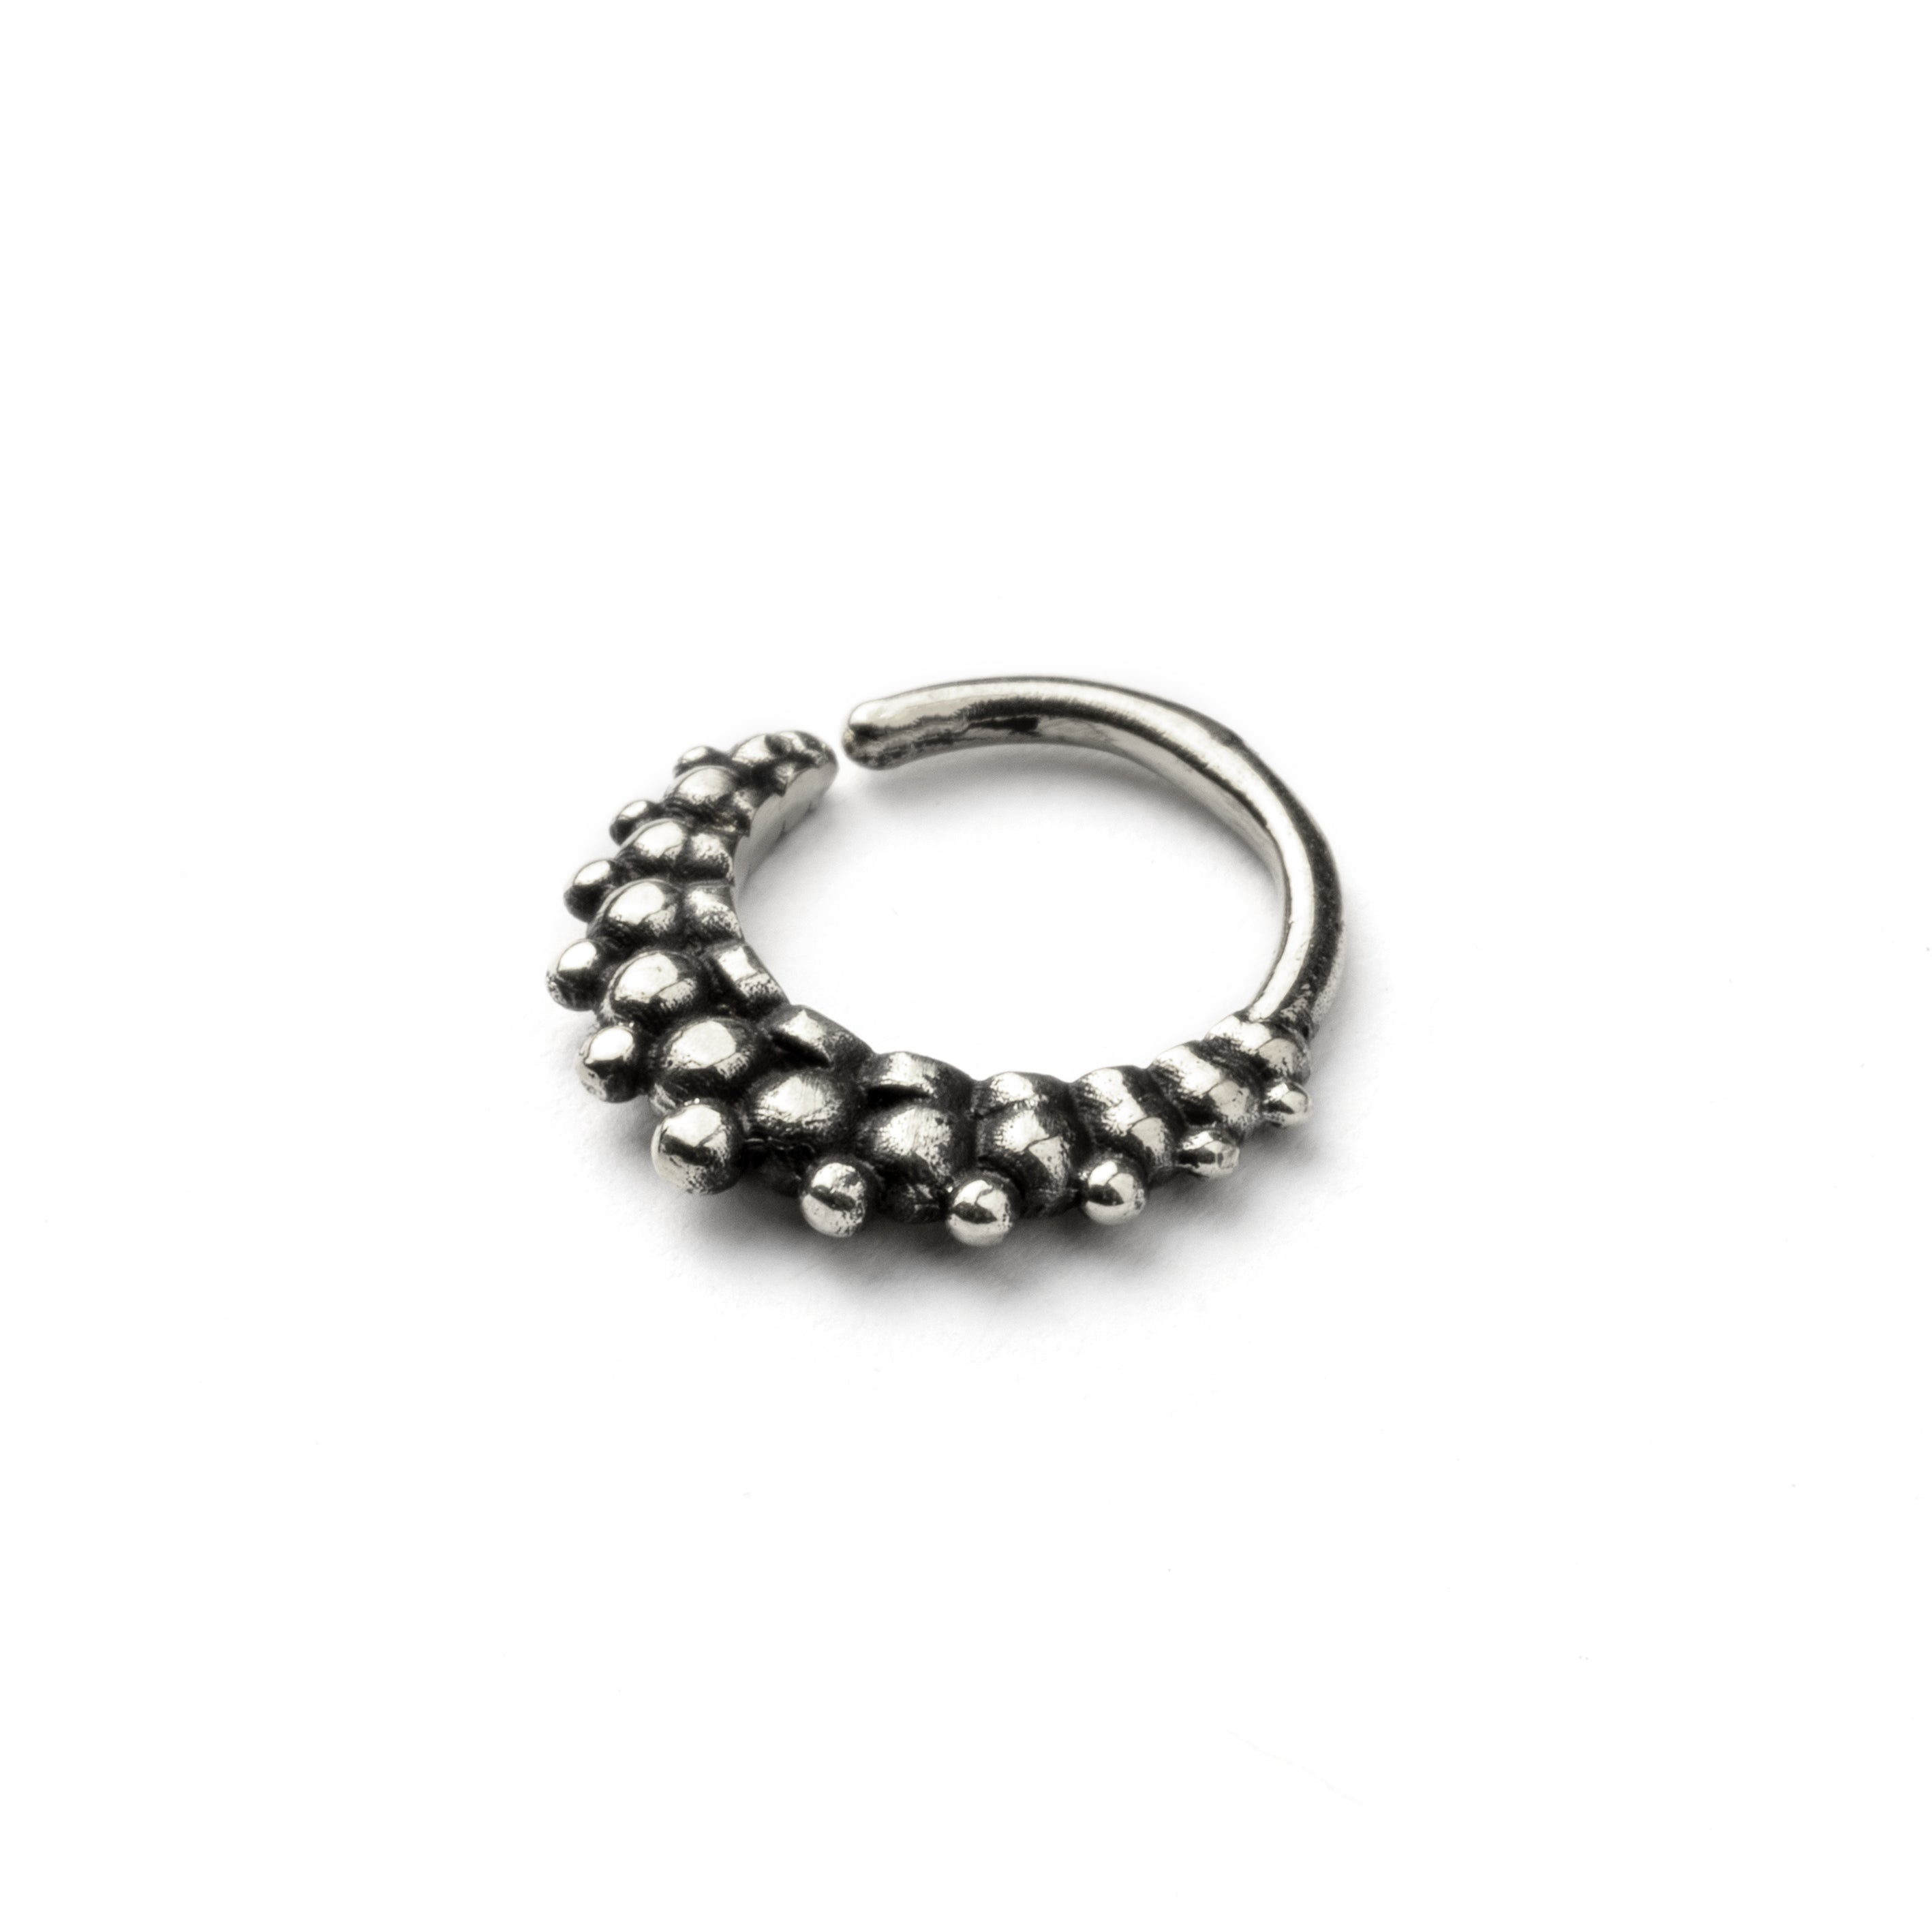 Rajee Silver Septum Ring right side view